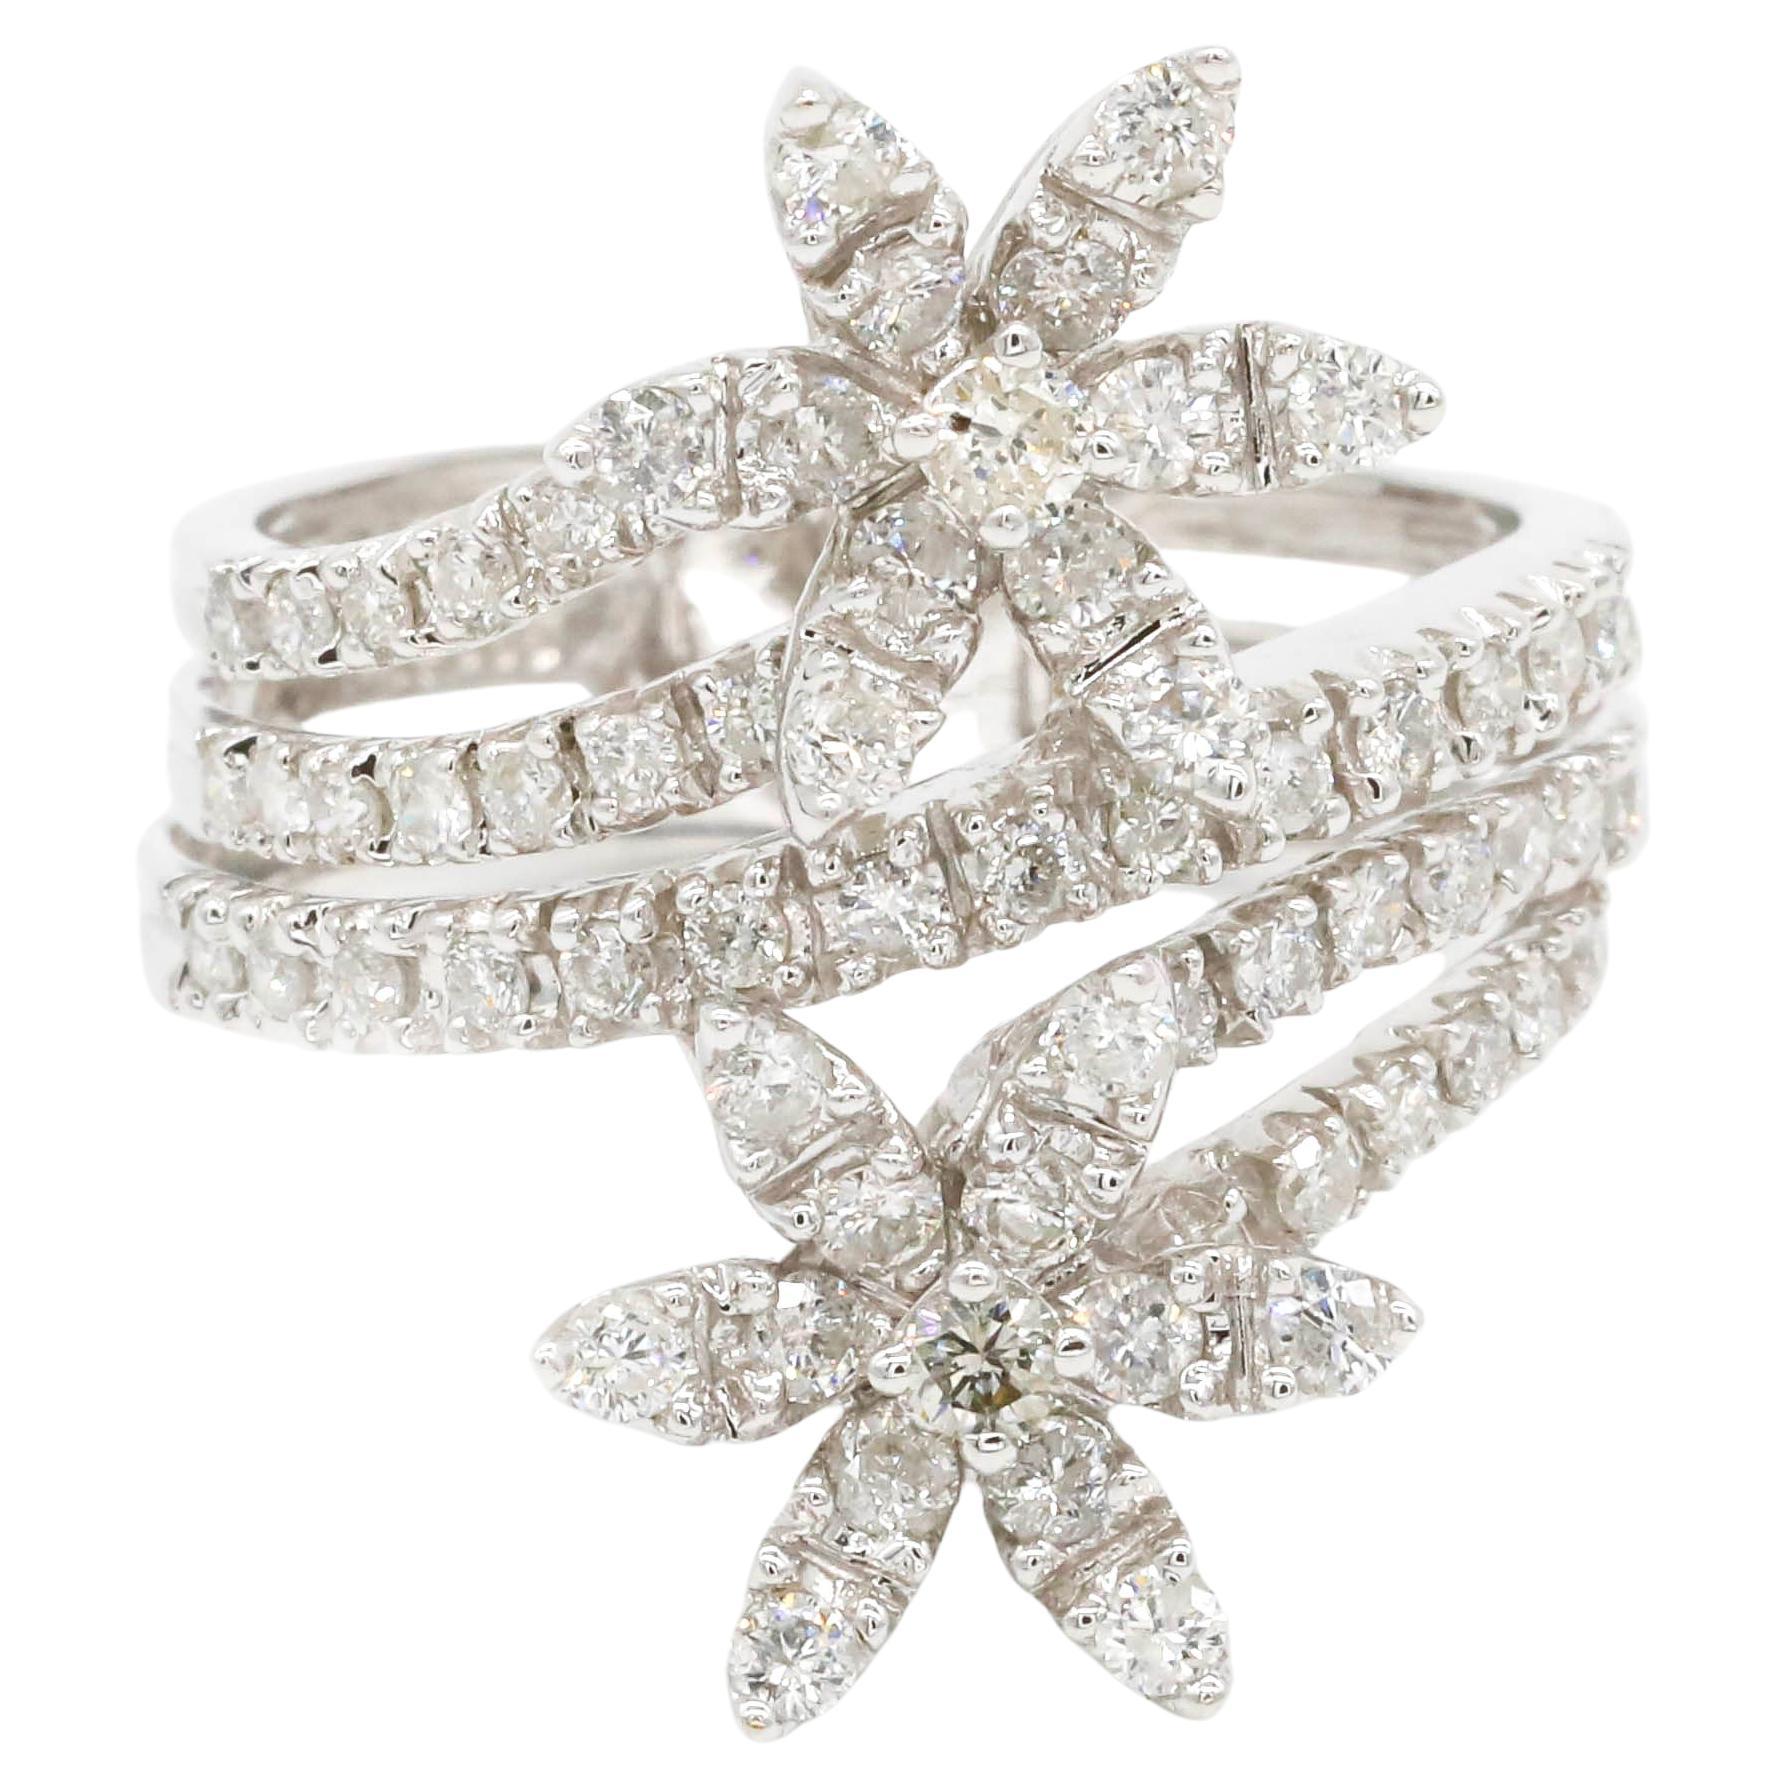 1.19 Carat Round Cut Diamond Pave Flower 14k White Gold Fine Wrap Ring

This modern ring features a total of 1.19 carats of diamond round shape Set in 14K White Gold.

We guarantee all products sold and our number one priority is your complete 100%